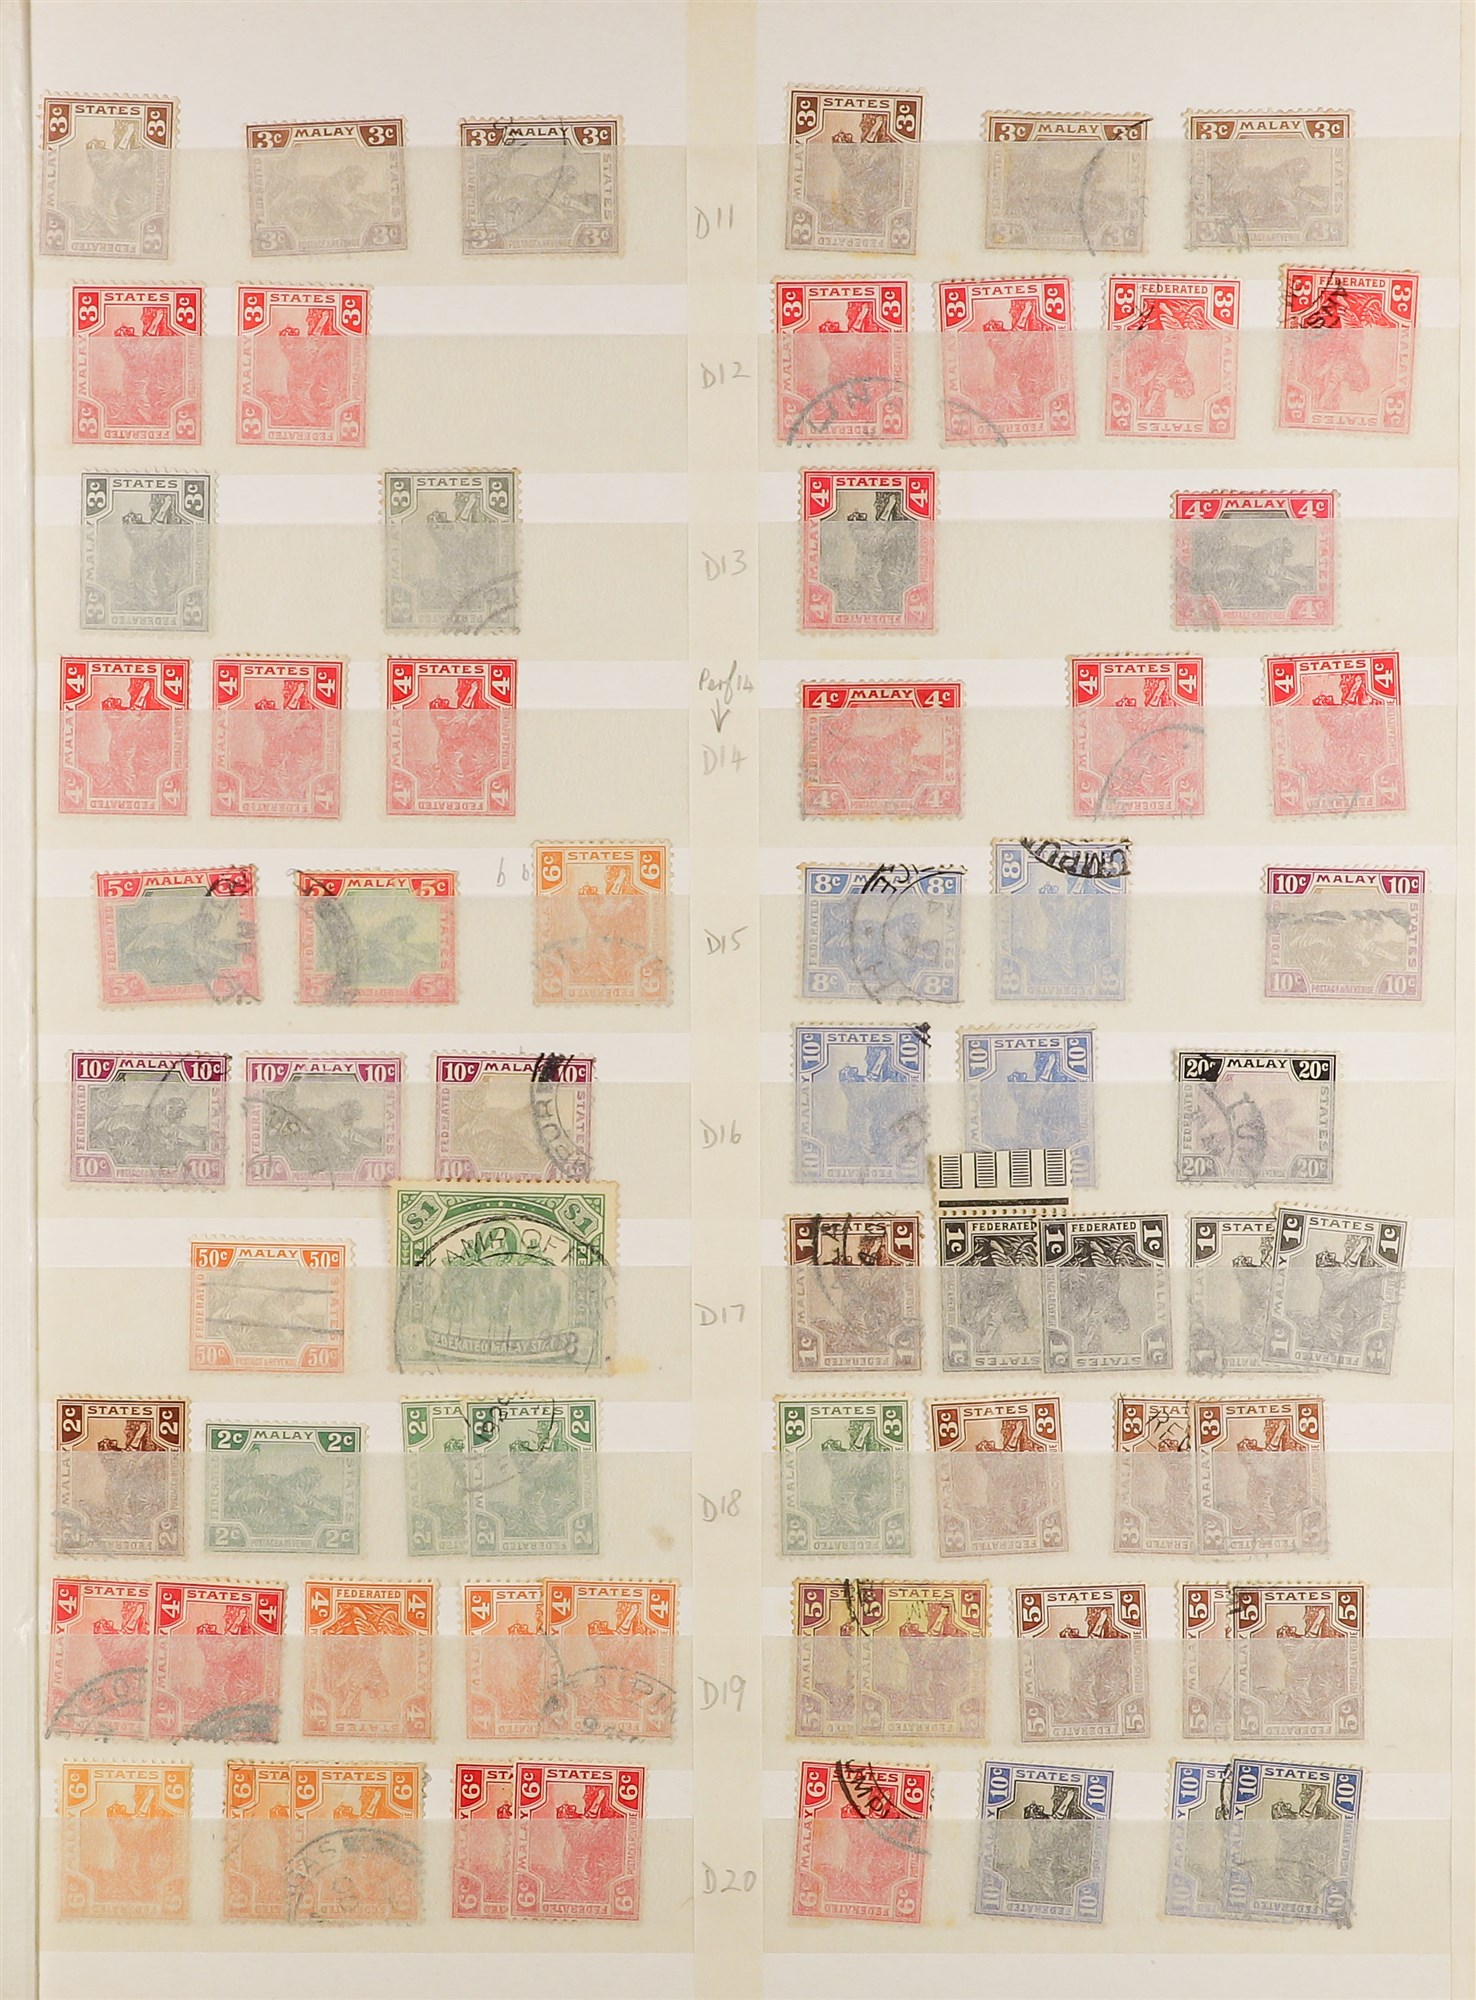 MALAYA-STRAITS SETT. 1867 - 1941 STOCK BOOK with mint and used stamps, 1867 3c on 1a, 8c on 2a & 32c - Image 7 of 10